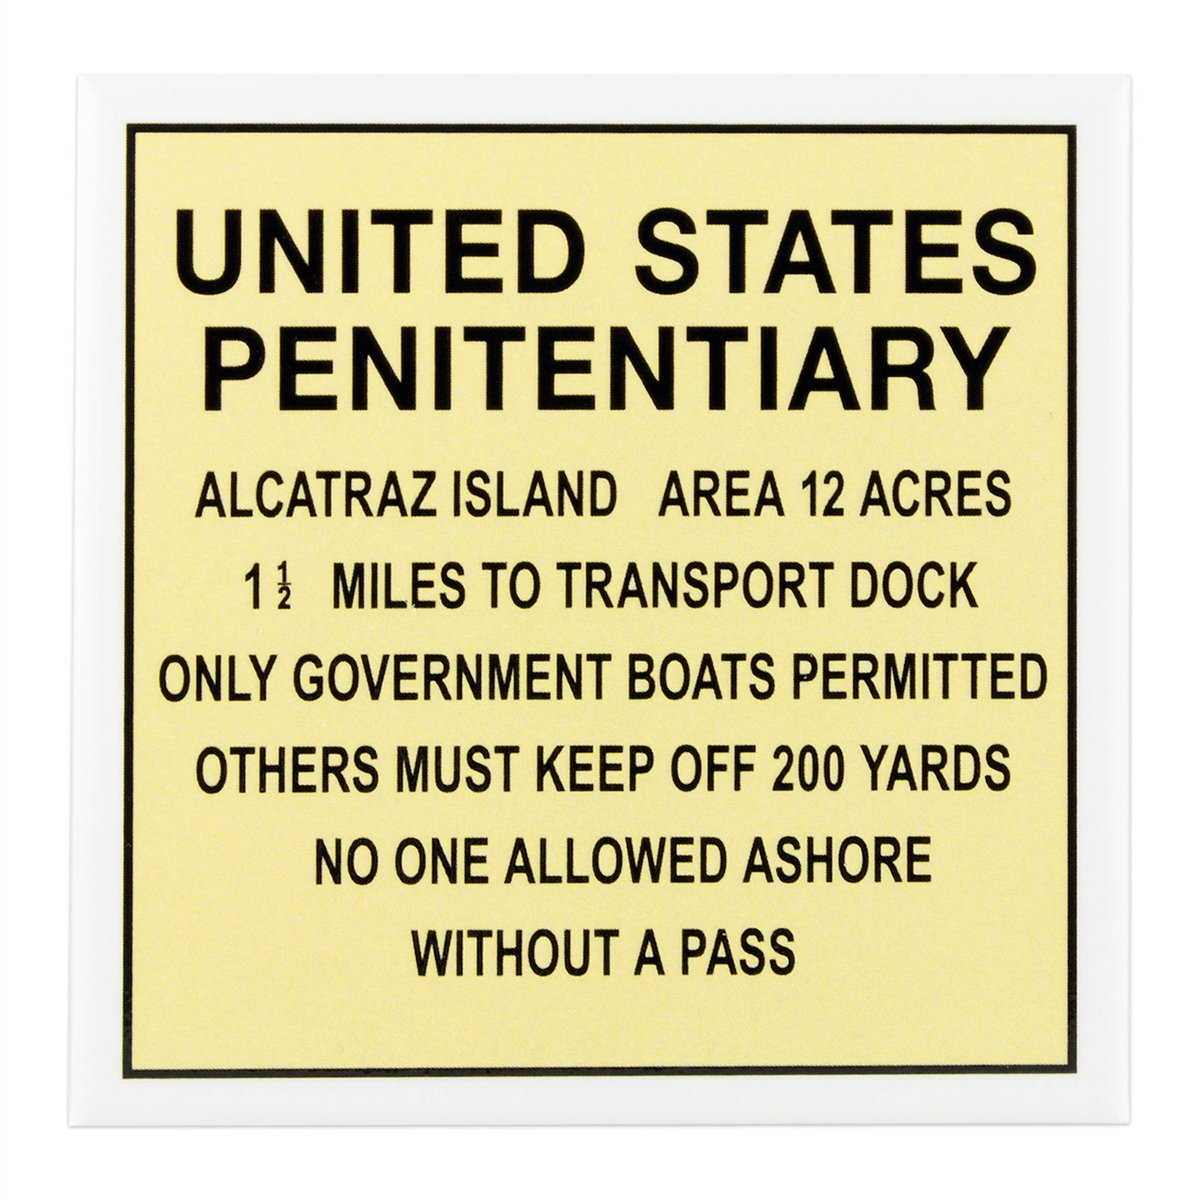 Souvenir magnet featuring illustration of US States Penitentiary Alcatraz's historical "Keep Off" warning sign.